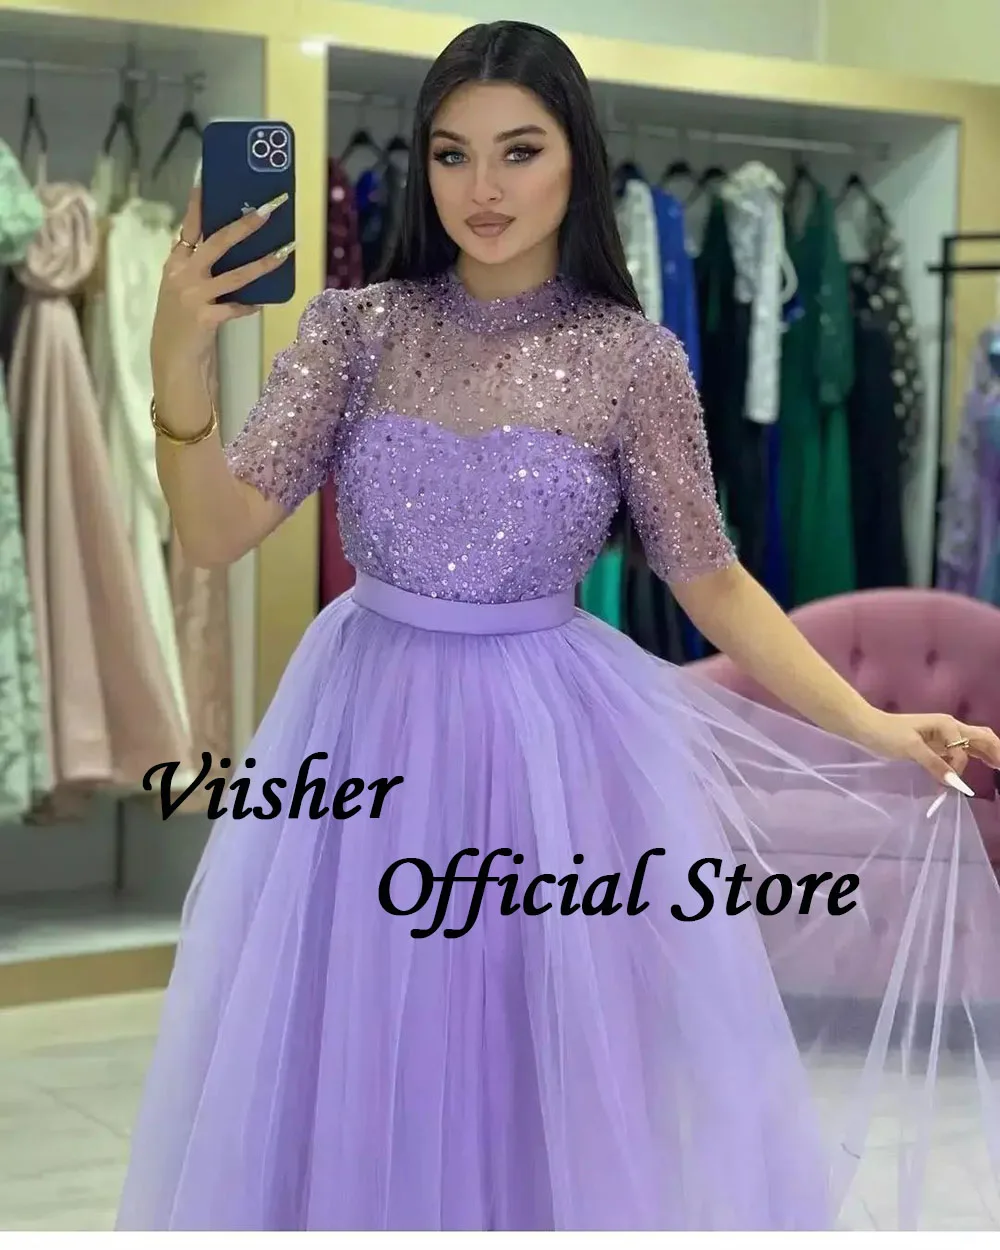 Viisher Lavender Sequins Tulle Prom Party Dresses Half Sleeve High Neck Arabic Evening Dress Ankle Length Formal Gowns